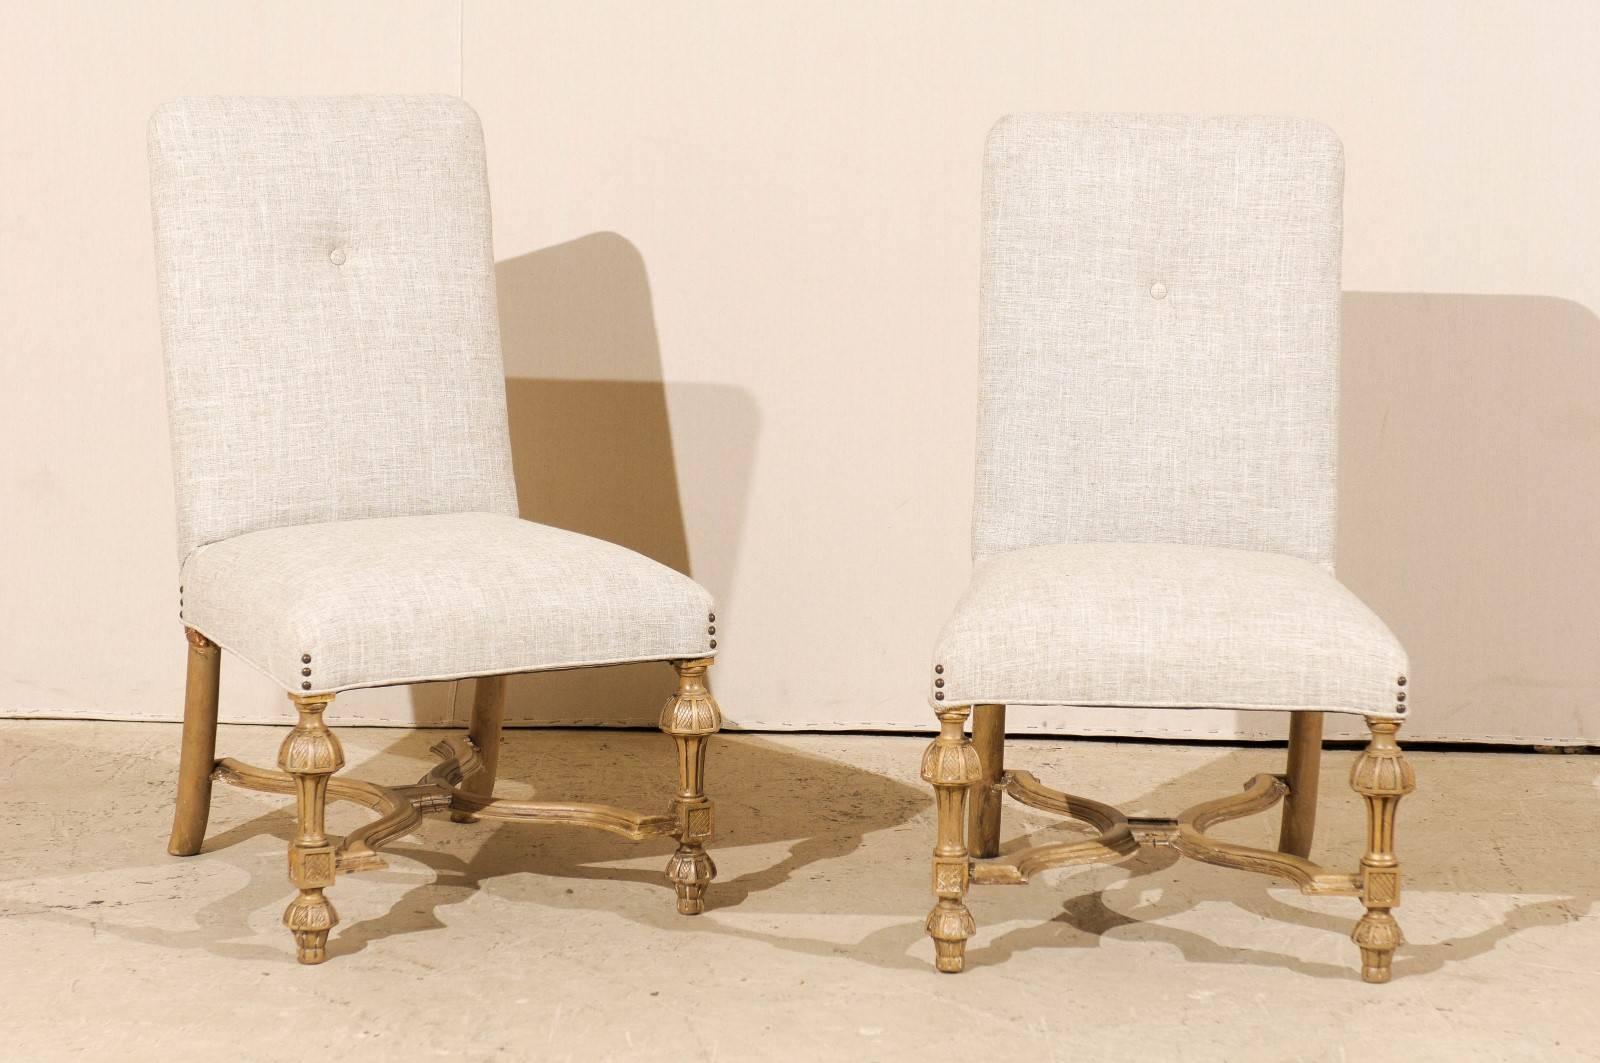 A pair of Italian late 19th century side chairs. These Italian chairs feature nicely carved legs and X-shaped cross stretcher. They are adorned with three nailheads at each corner of the seat. They are painted light grey over gold color. The pair